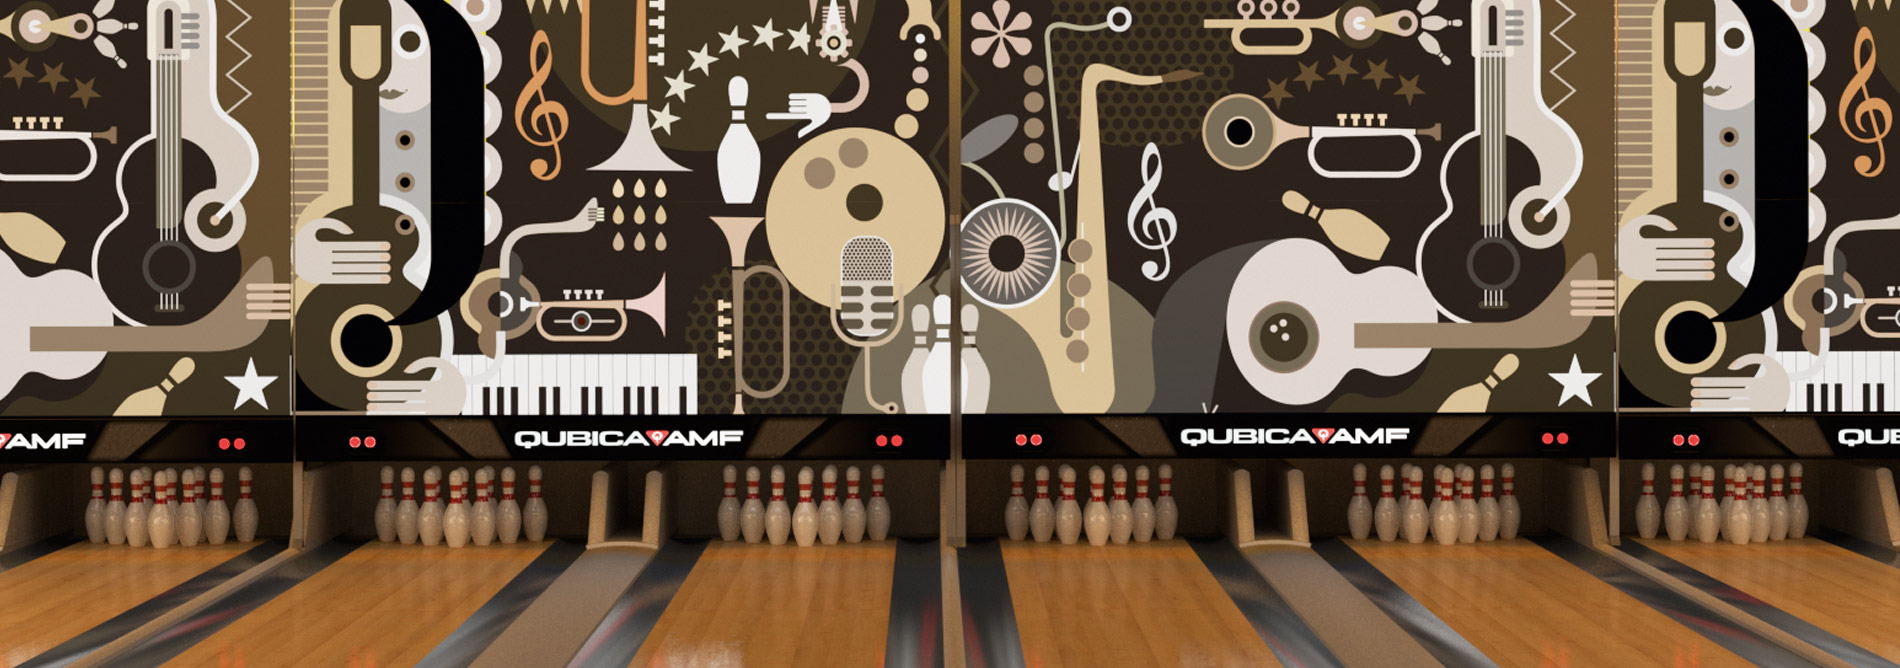 Bowling-QubicaAMF-harmony-masking-collection-banner.jpg